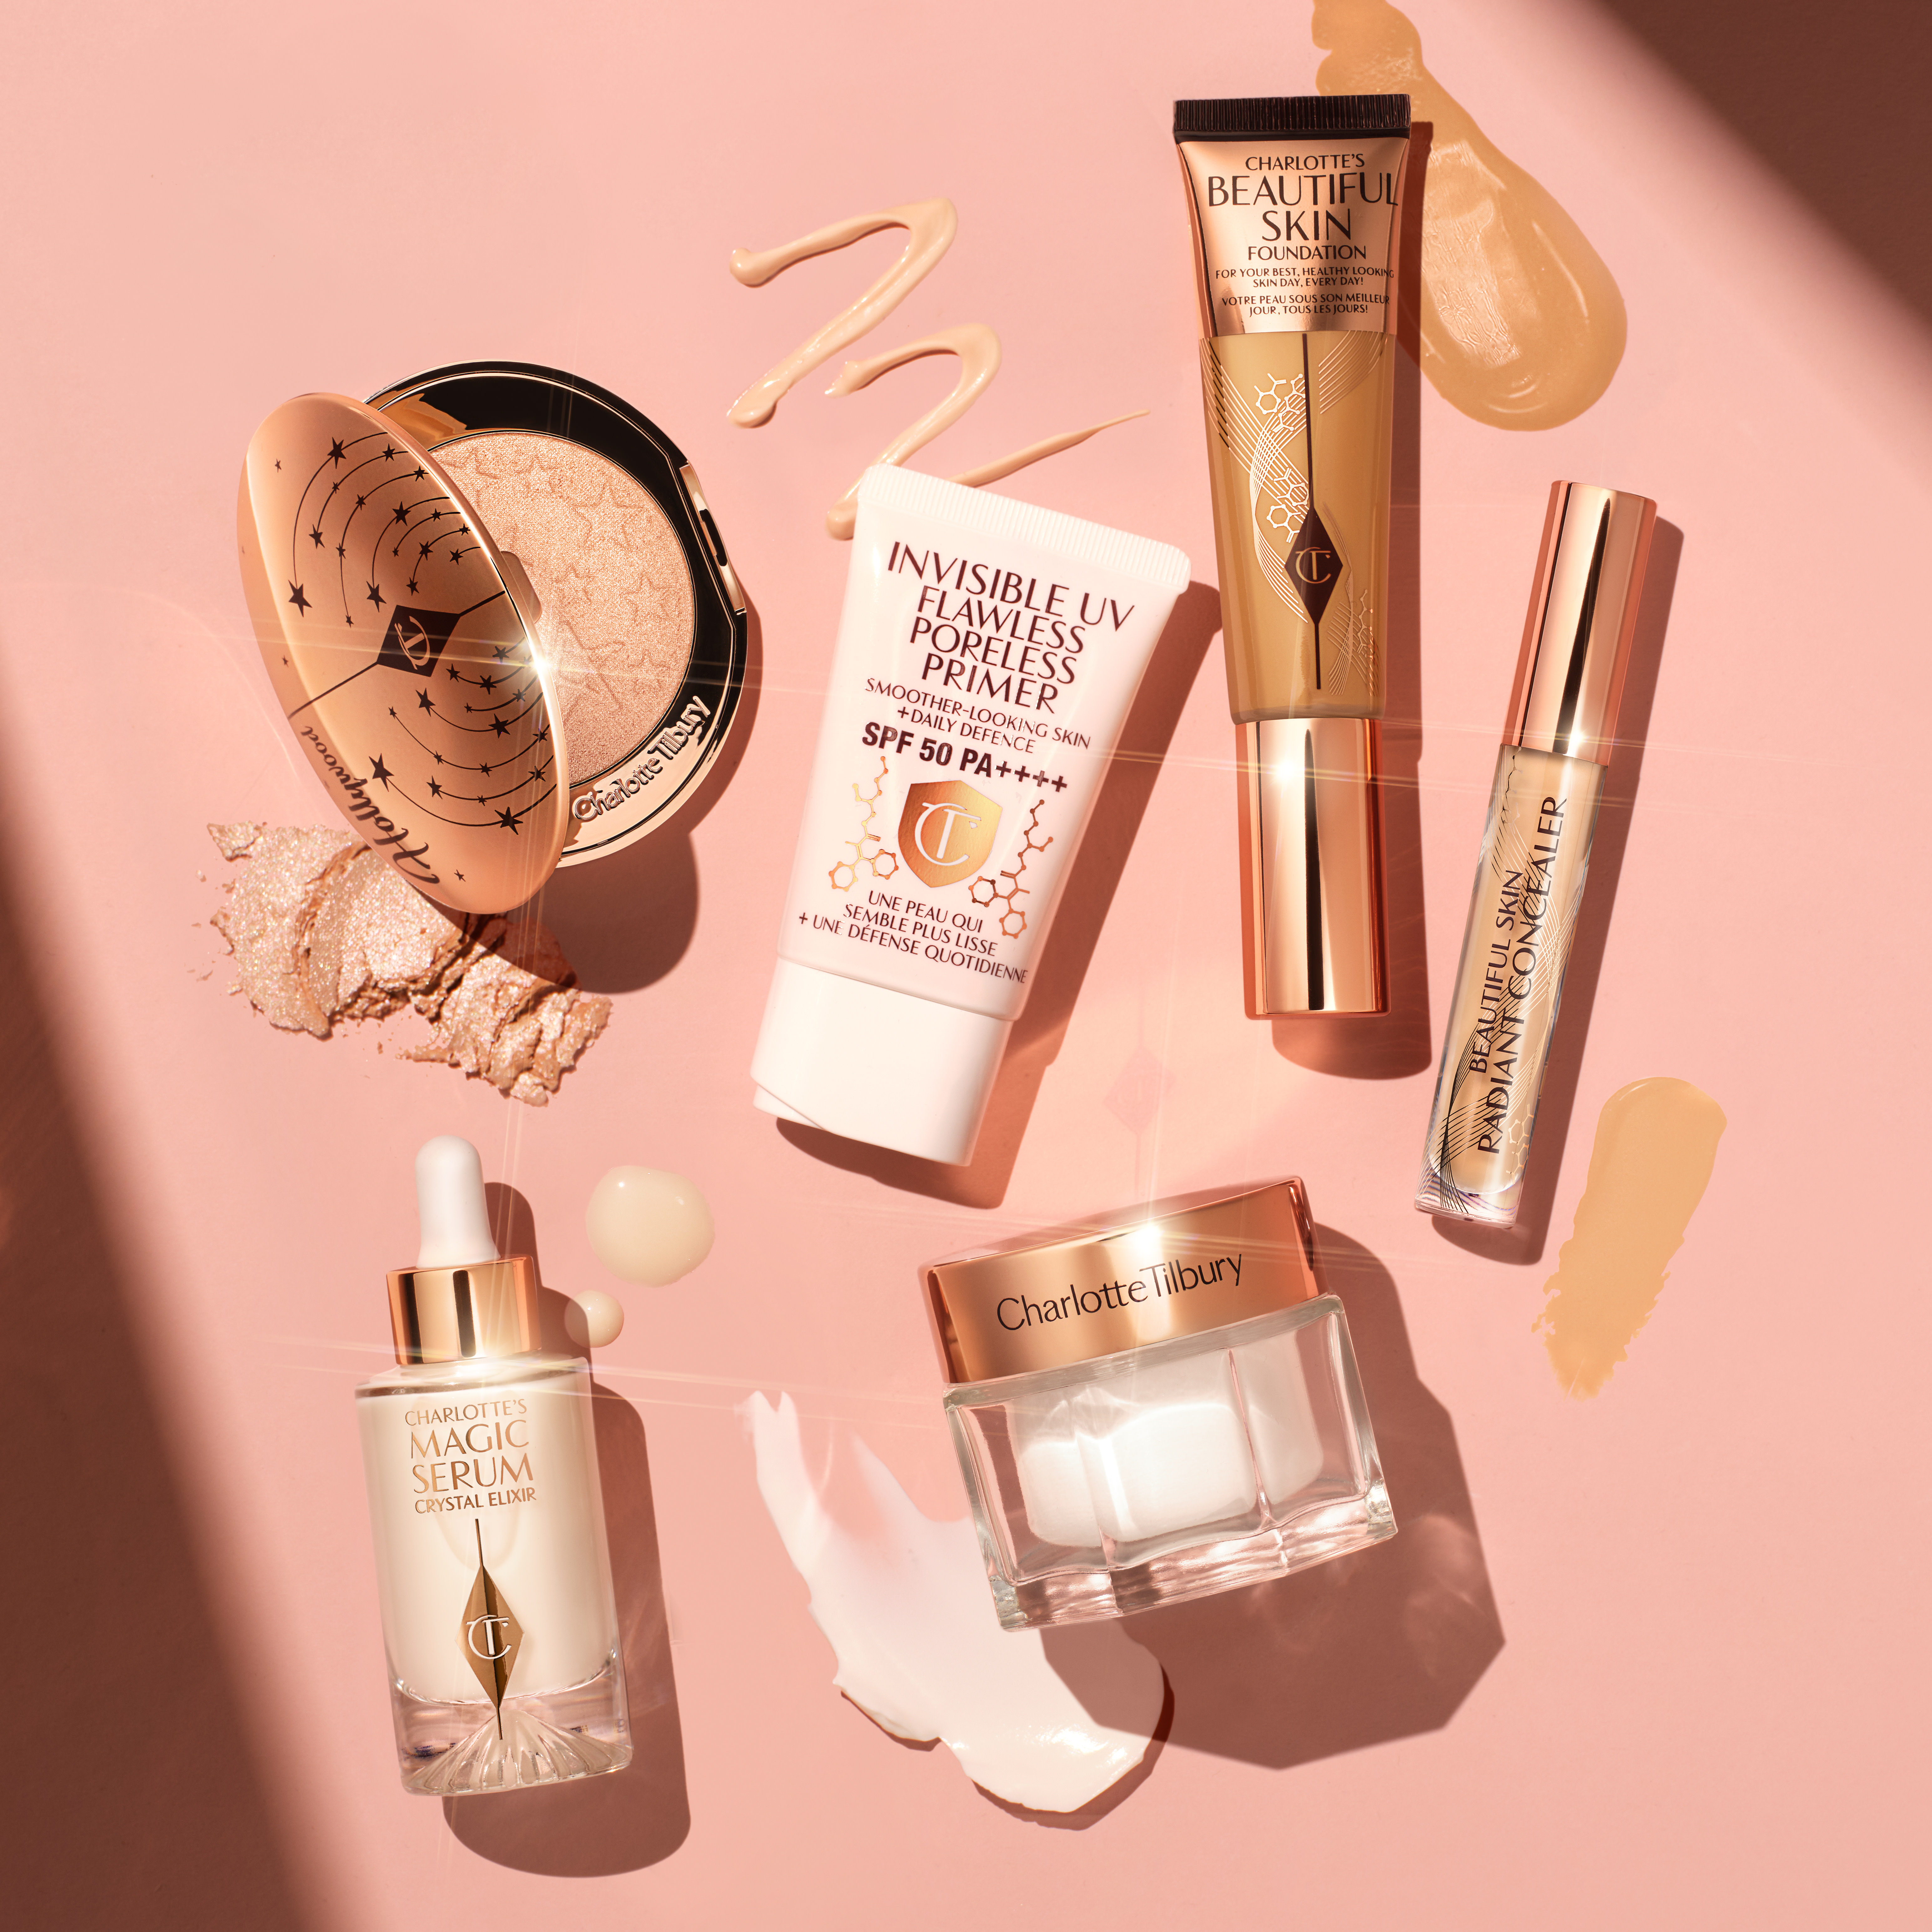 Charlotte's complexion and skincare heroes including Charlotte's Magic Cream and Beautiful Skin Foundation